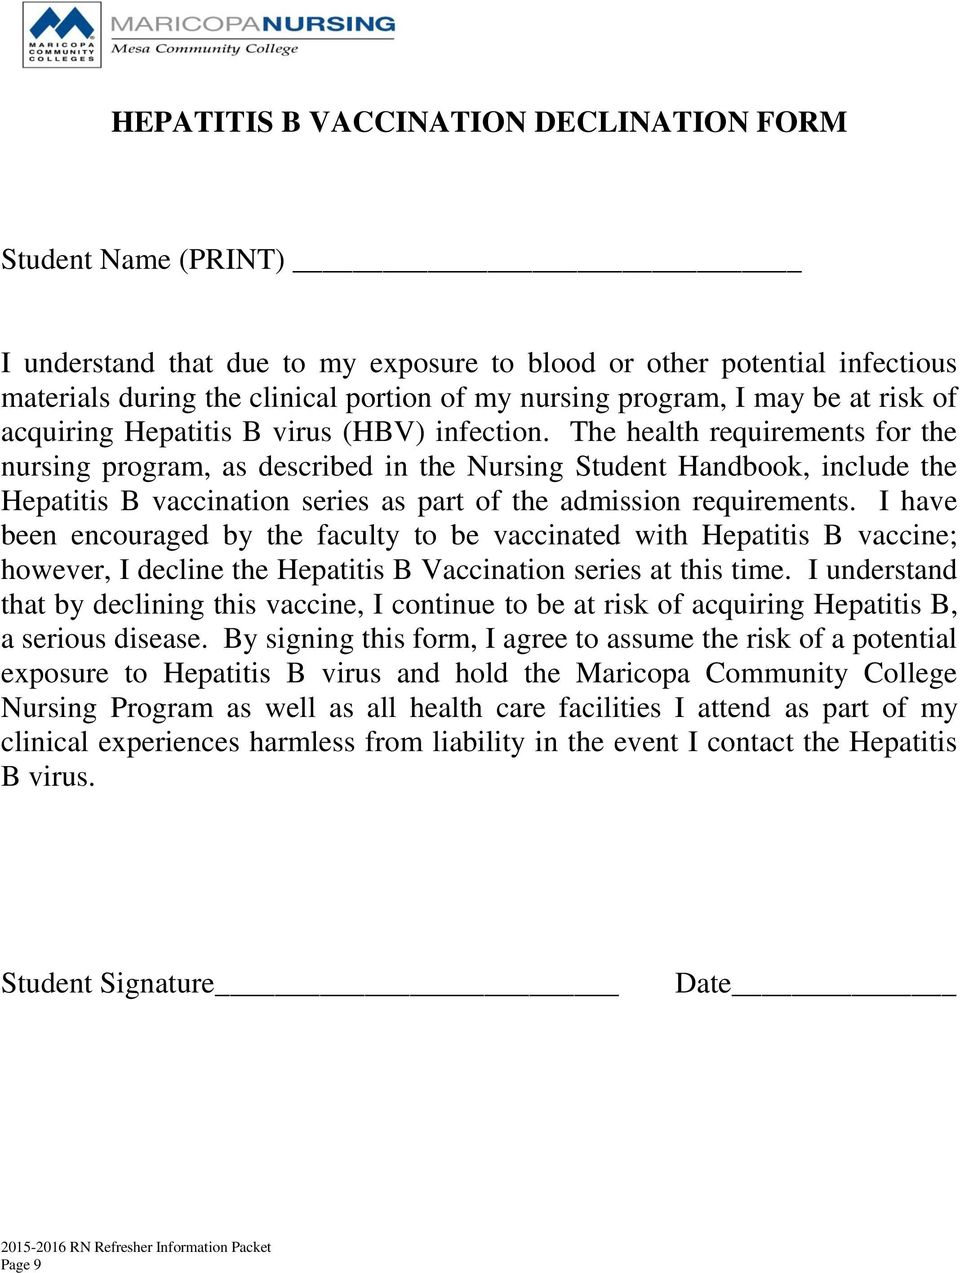 The health requirements for the nursing program, as described in the Nursing Student Handbook, include the Hepatitis B vaccination series as part of the admission requirements.